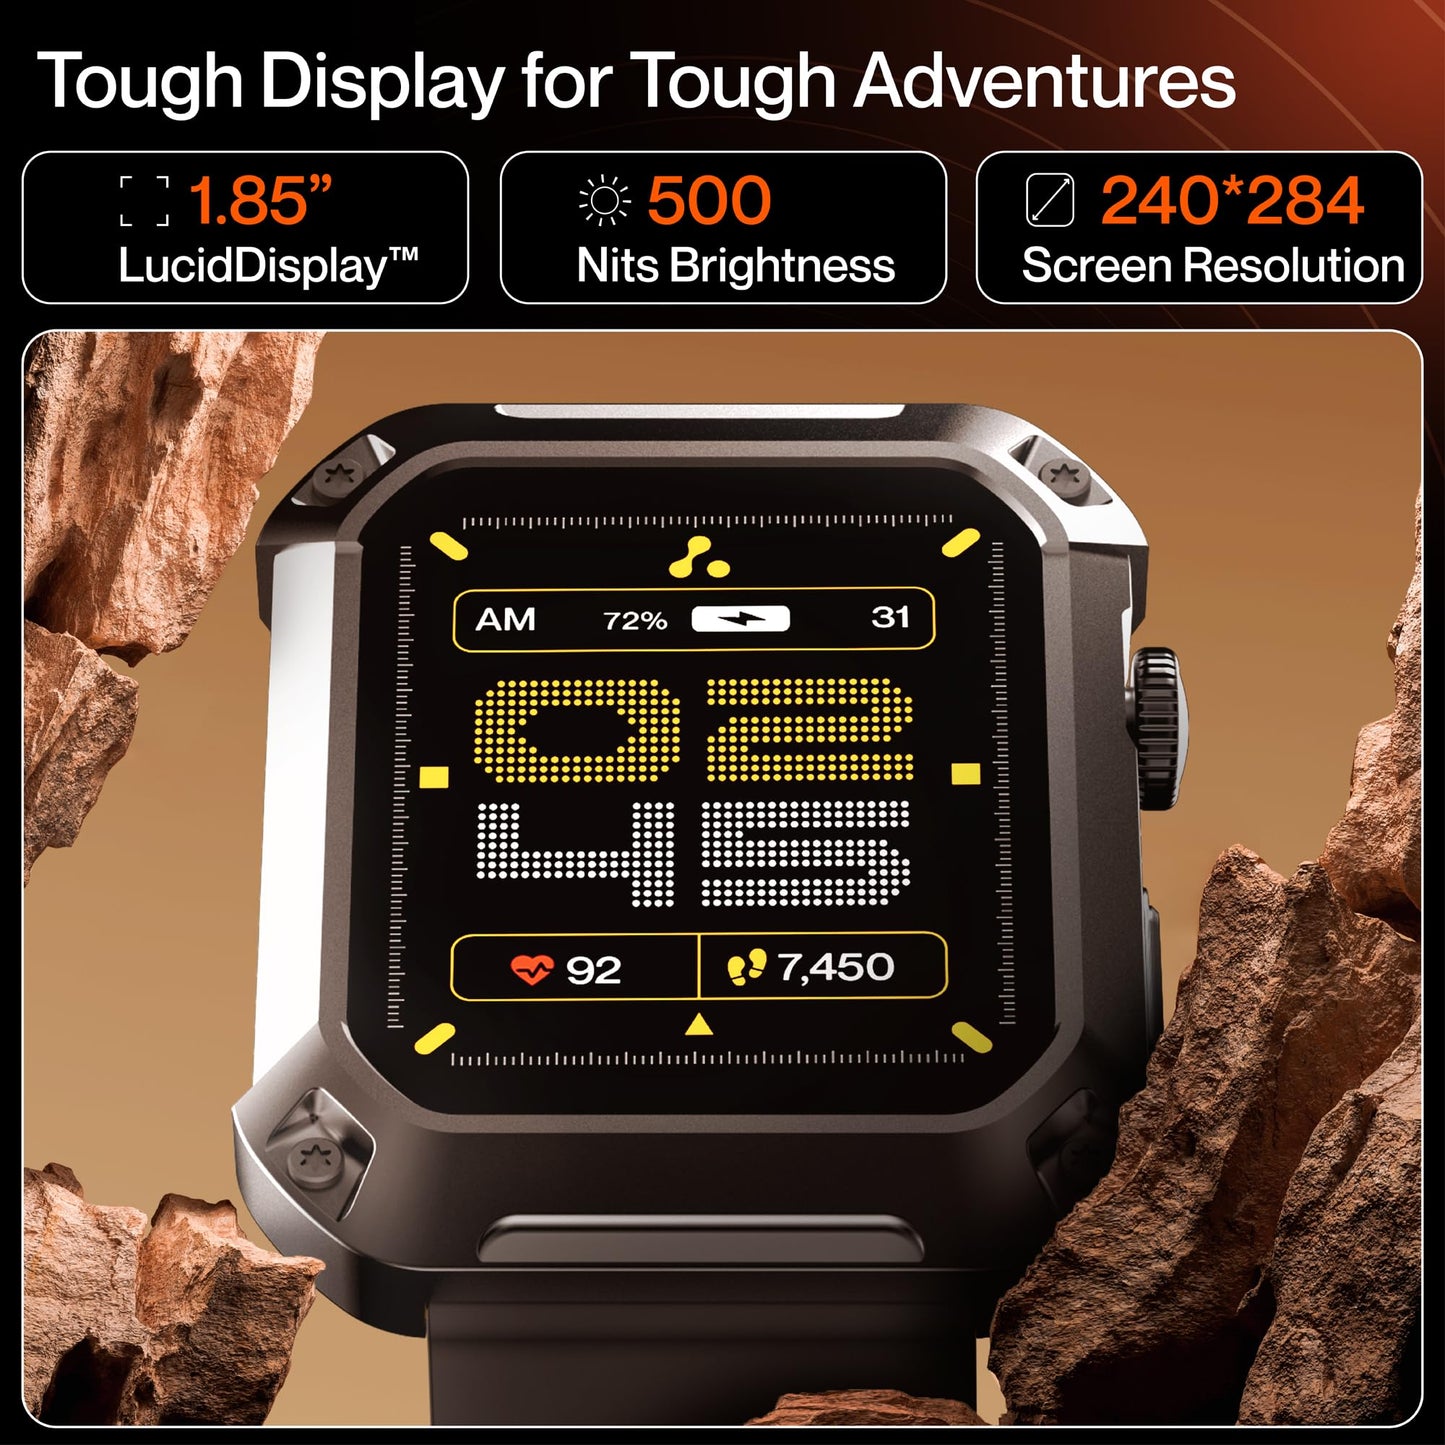 Ambrane 1.85" Uni Pair BT Calling Smartwatch, Rugged & Sporty Metal Body, 10 Days Battery, 500 NITS, 100+ Sports Mode with IP68, Sp02 Tracking, 100+ Watch Faces (Stud, Blue)